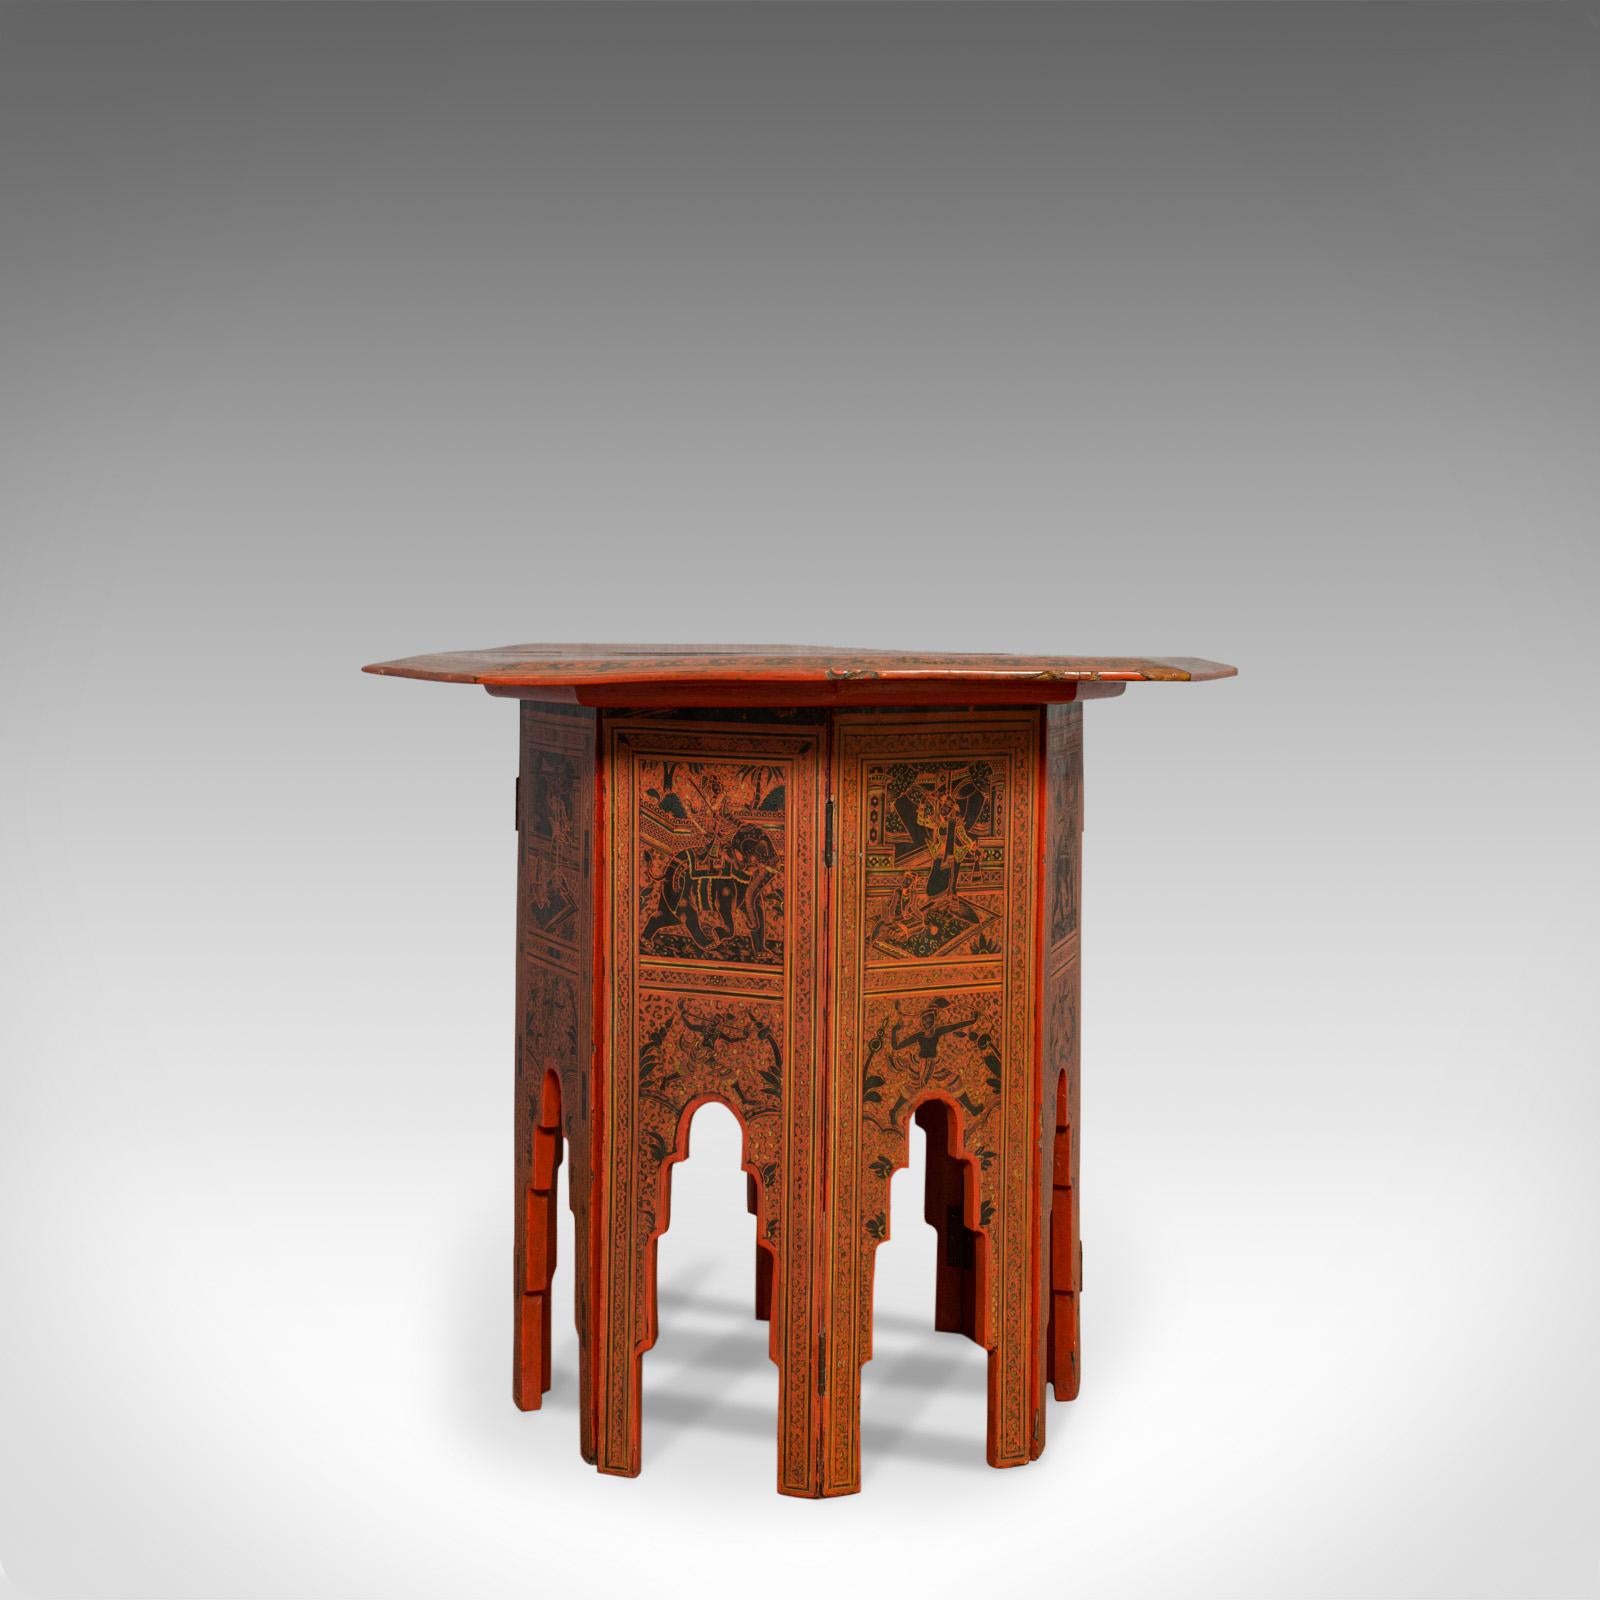 This is an antique occasional table. An English, Chinese elm octagonal coffee or lamp table in strong Moorish taste and dating to the mid-19th century, circa 1850.

Burnt red hues to the lacquered Chinese elm tabletop and legs
Aged running